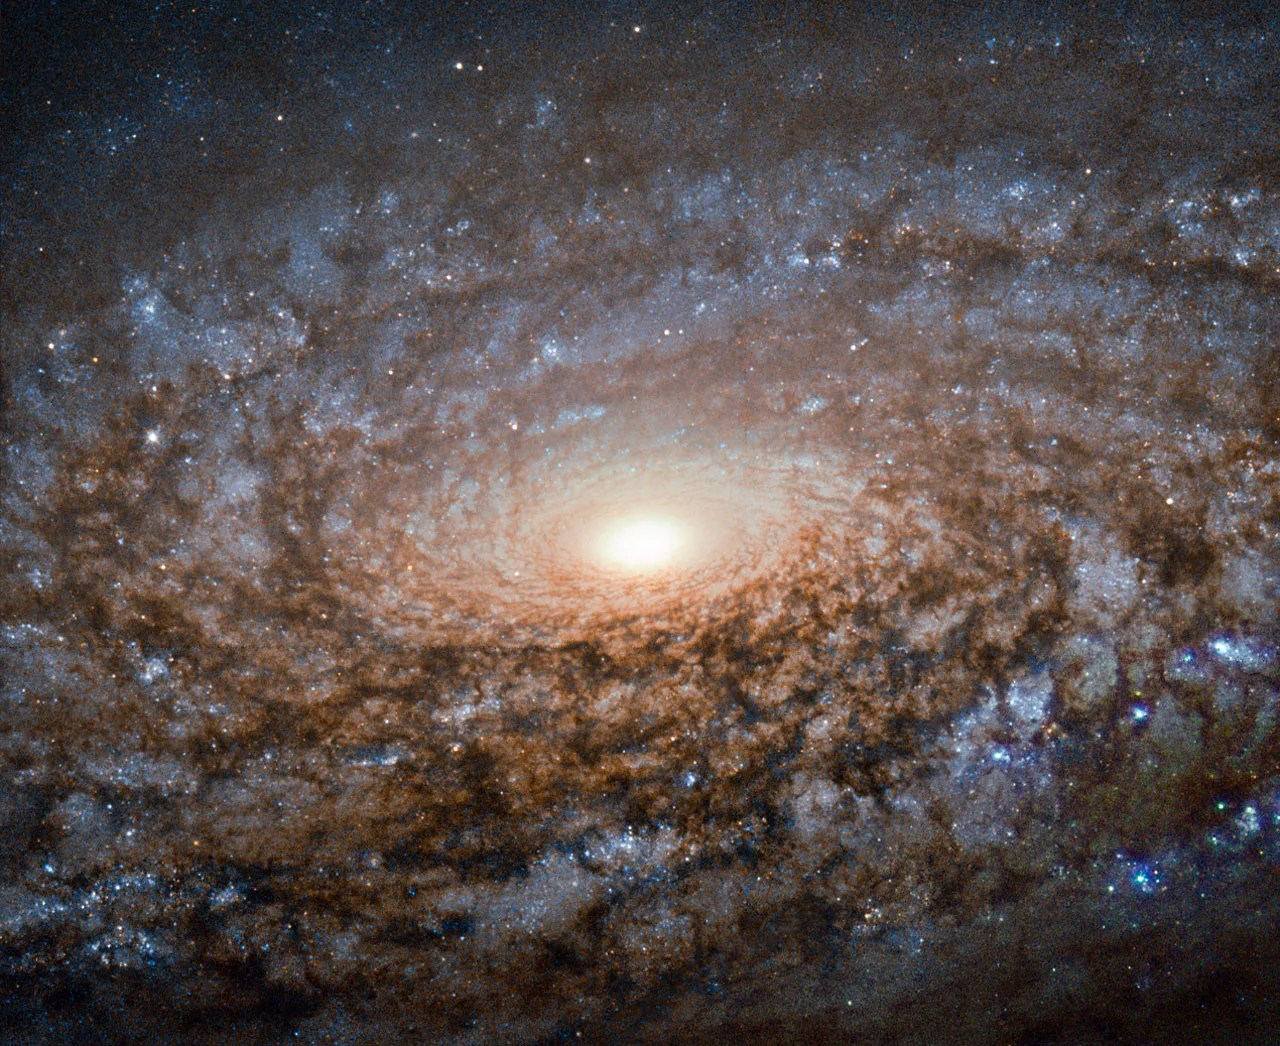 Spiral galaxy ngc 3521 has a soft, woolly appearance of its brownish spiral arms around the galaxies core, interspersed with blue-white and pink patches of stars.